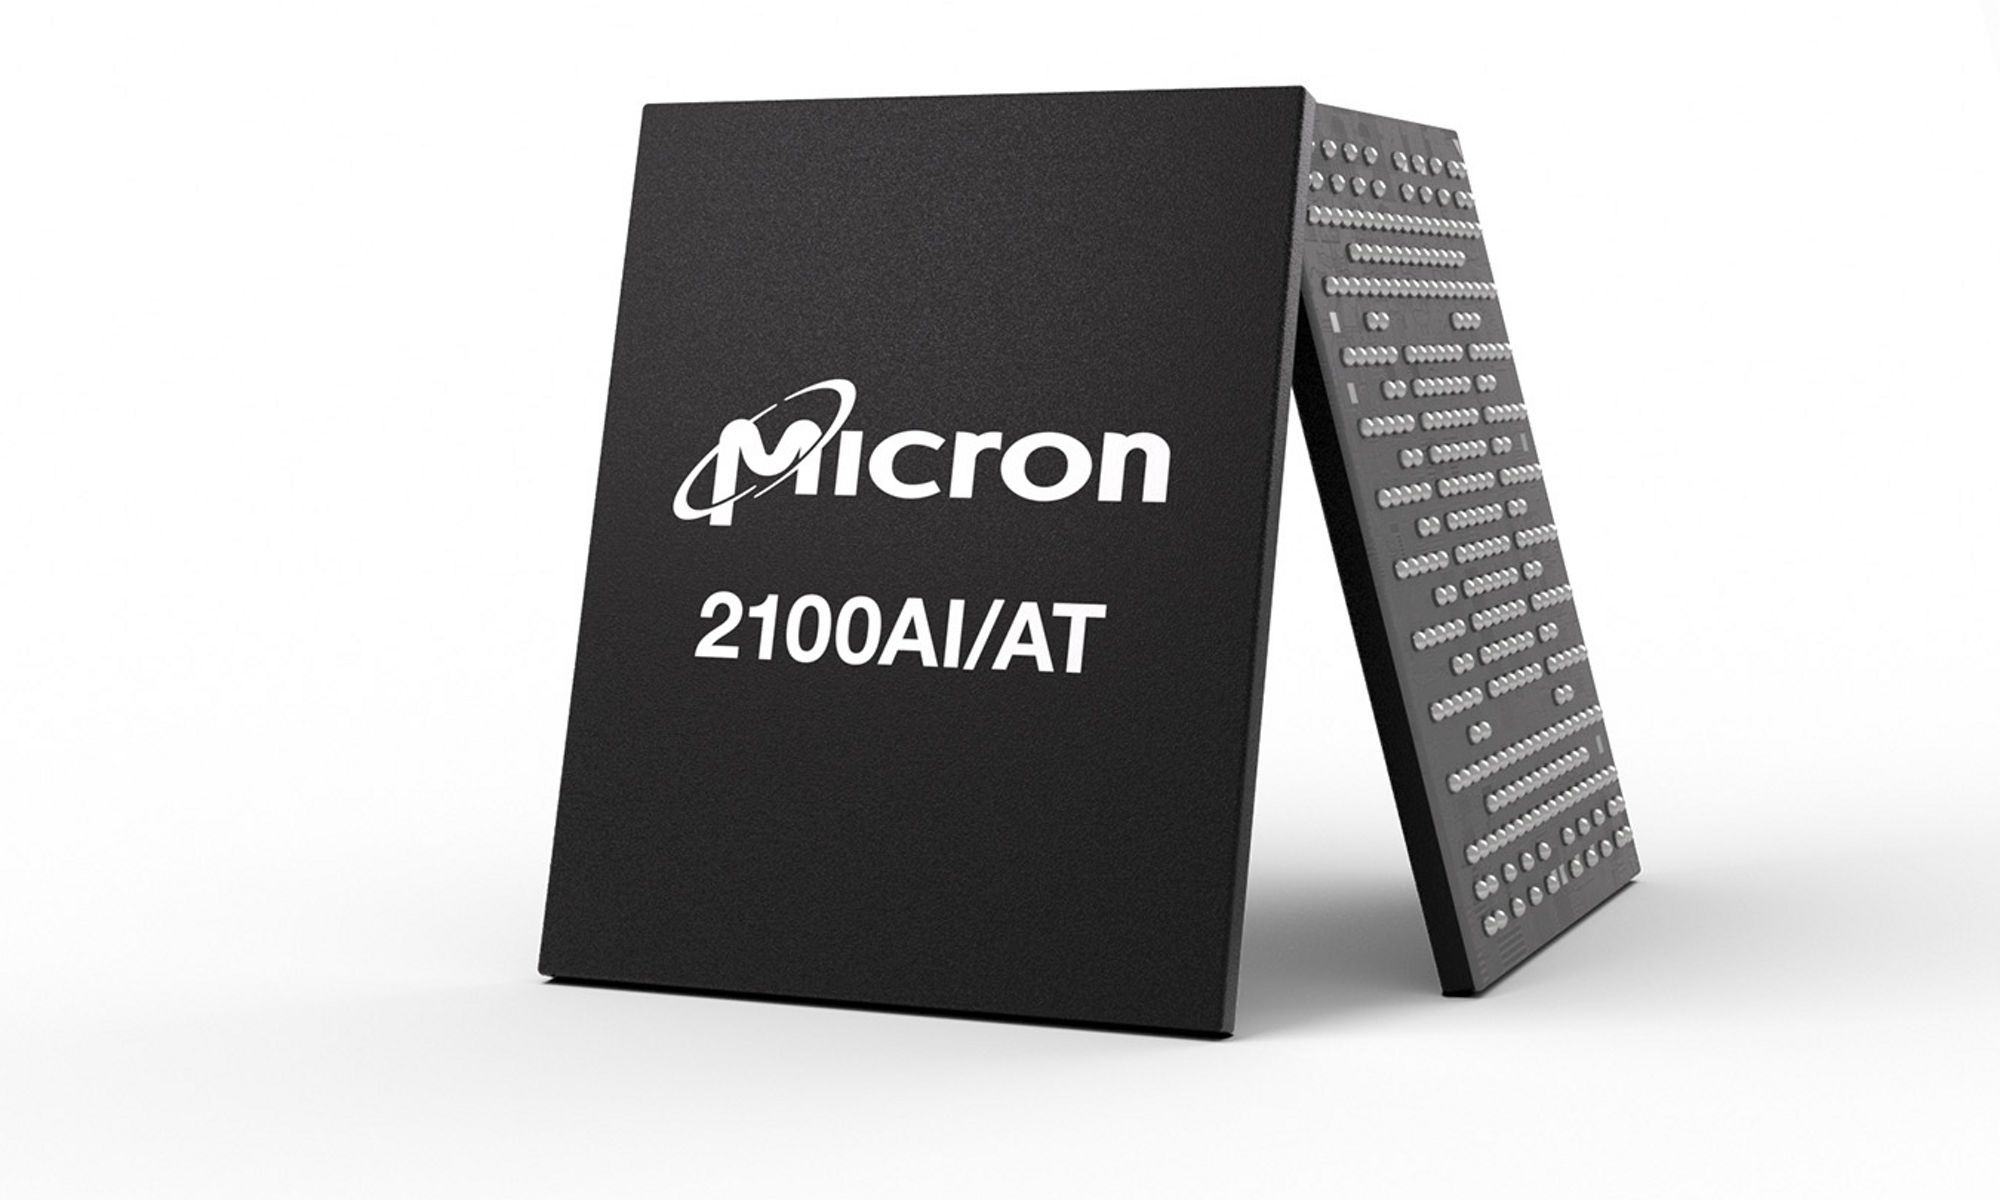 Micron 2100AT SSD front and back